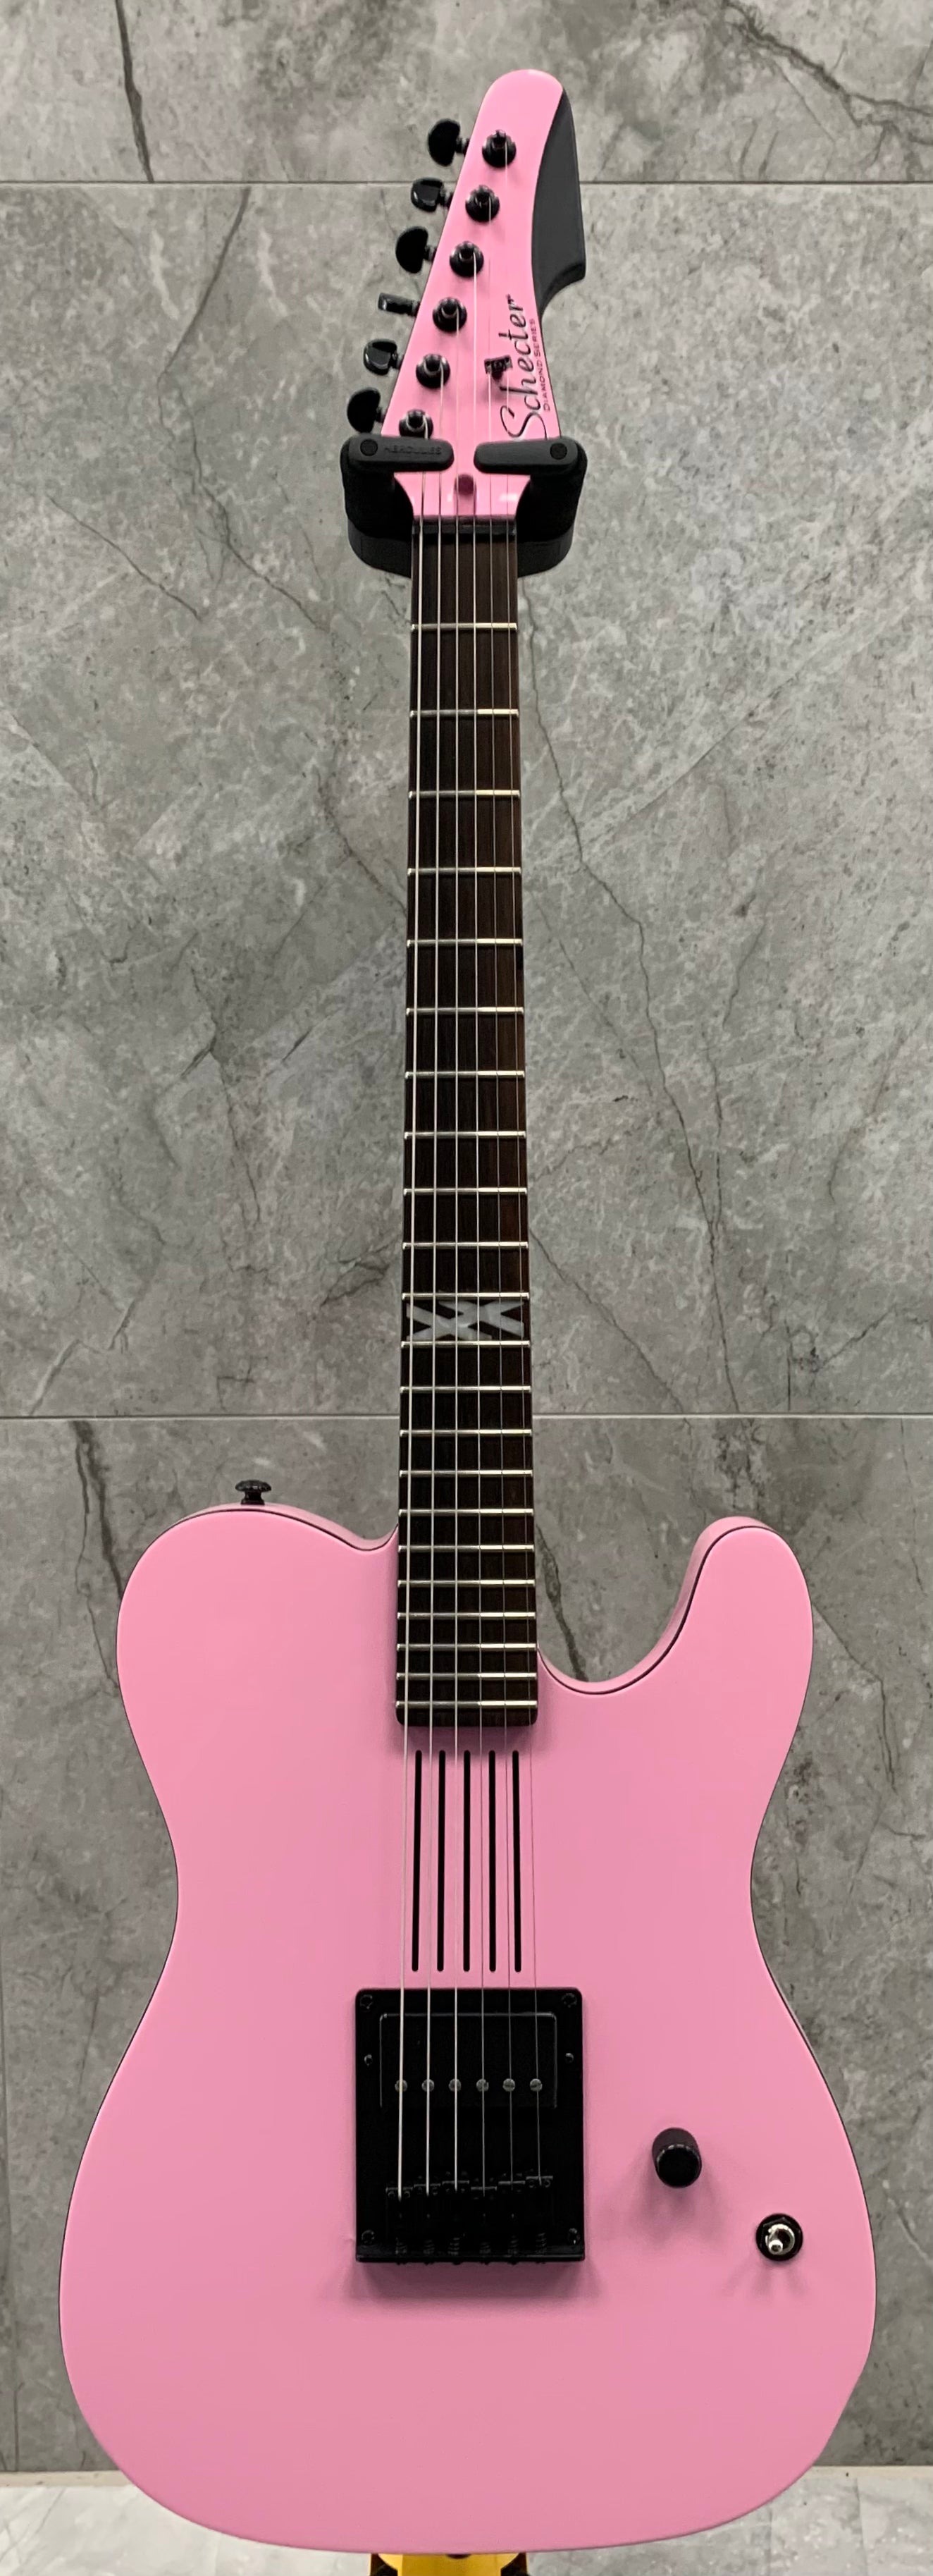 Schecter Machine Gun Kelly Signature PT Electric Guitar Tickets To My Downfall Pink 85-SHC SERIAL NUMBER IW22031593 - 8.0 LBS USED SPECIAL